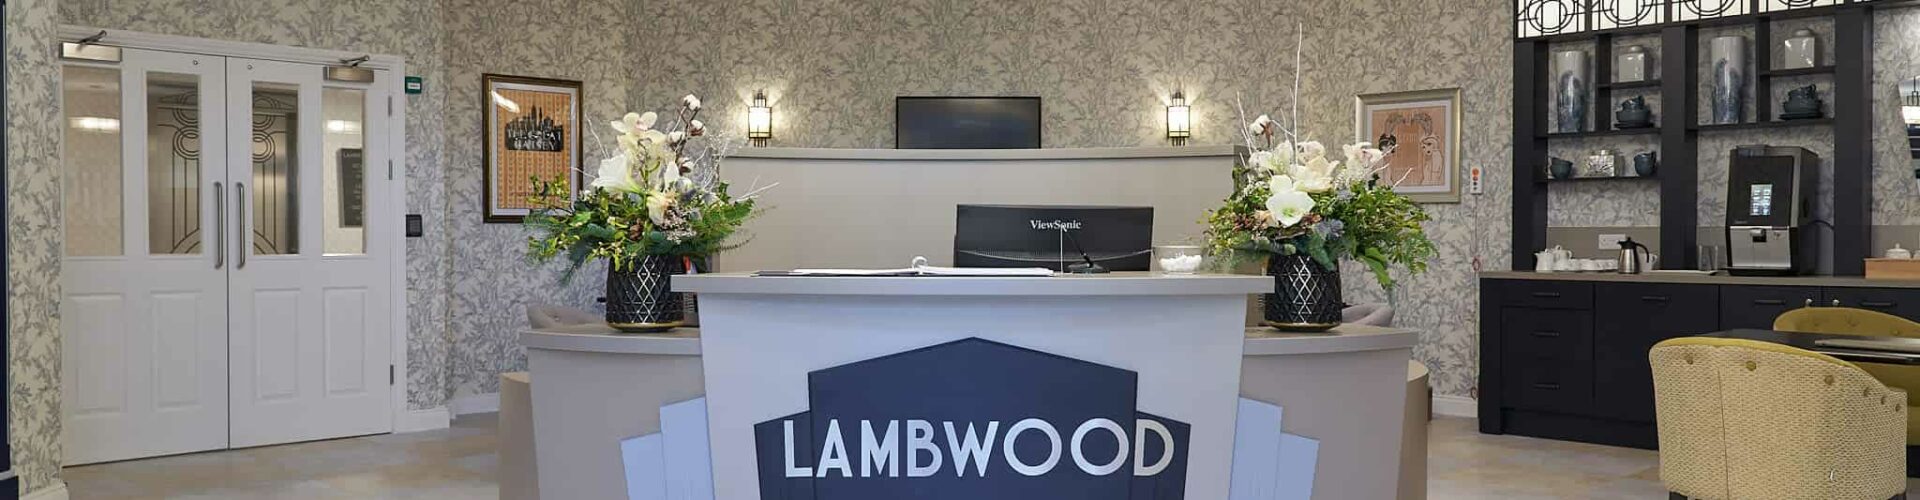 Lambwood Heights Care Home Chigwell Reception